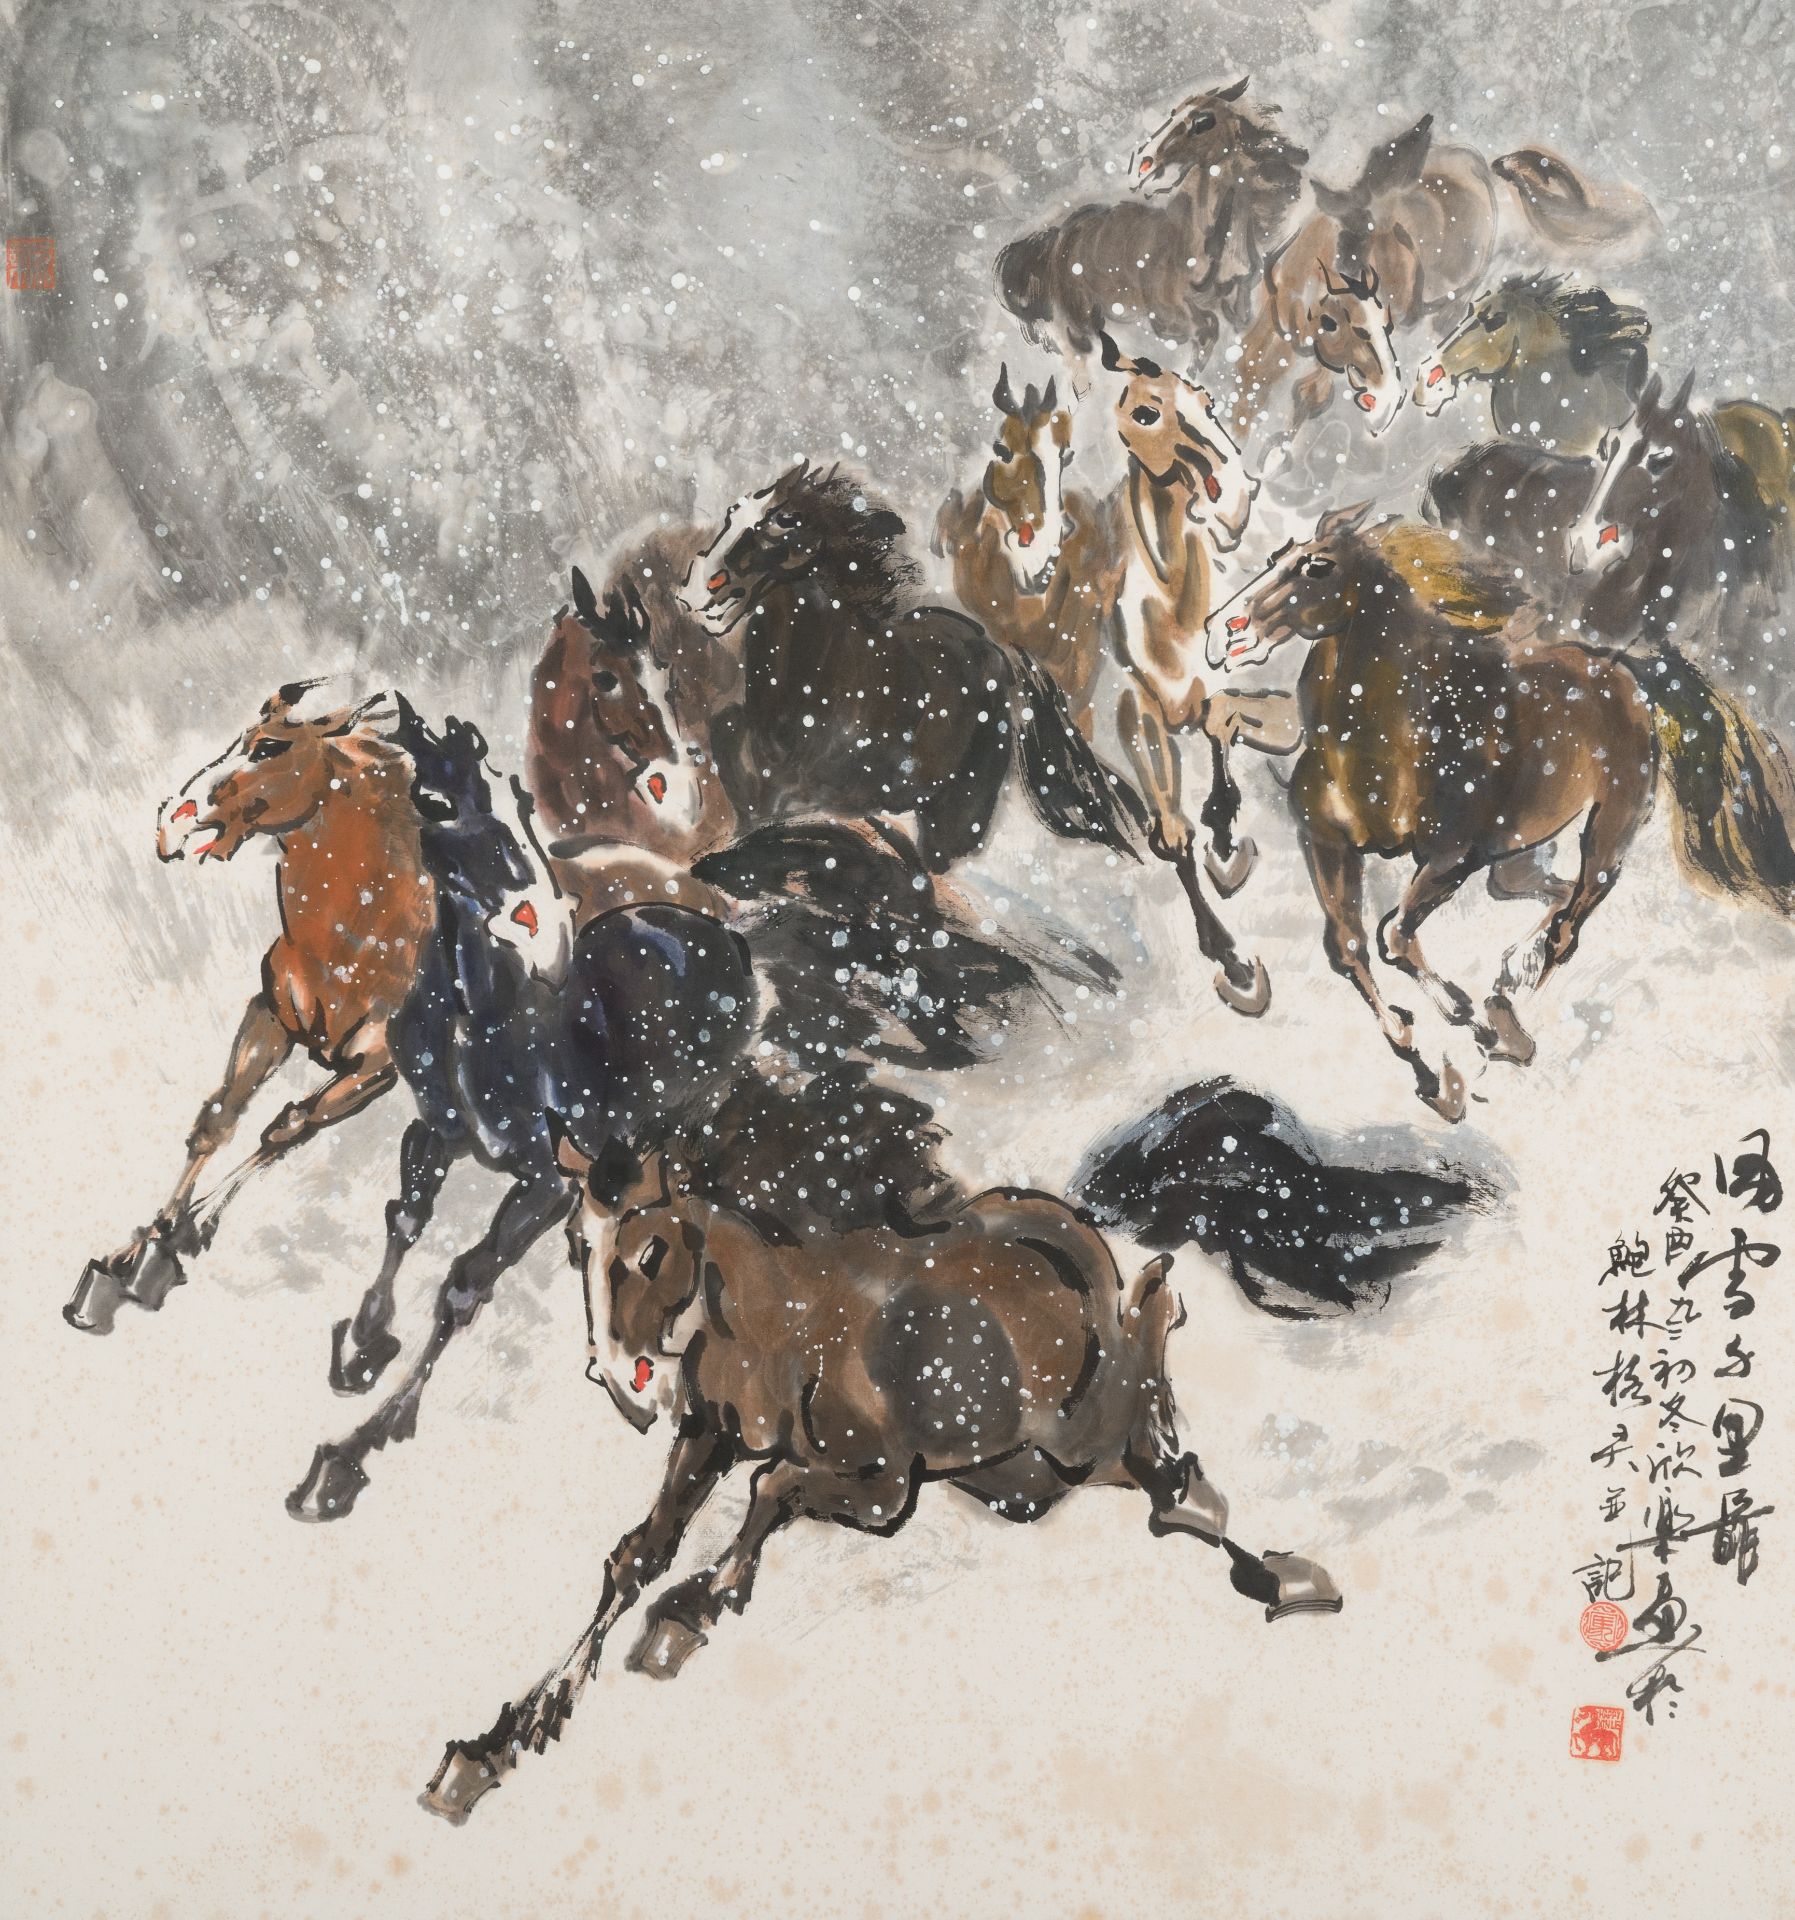 Ma Xinle 馬欣樂‚ (1963-): 'Twelve horses in the snow', ink and colour on paper, dated 1993